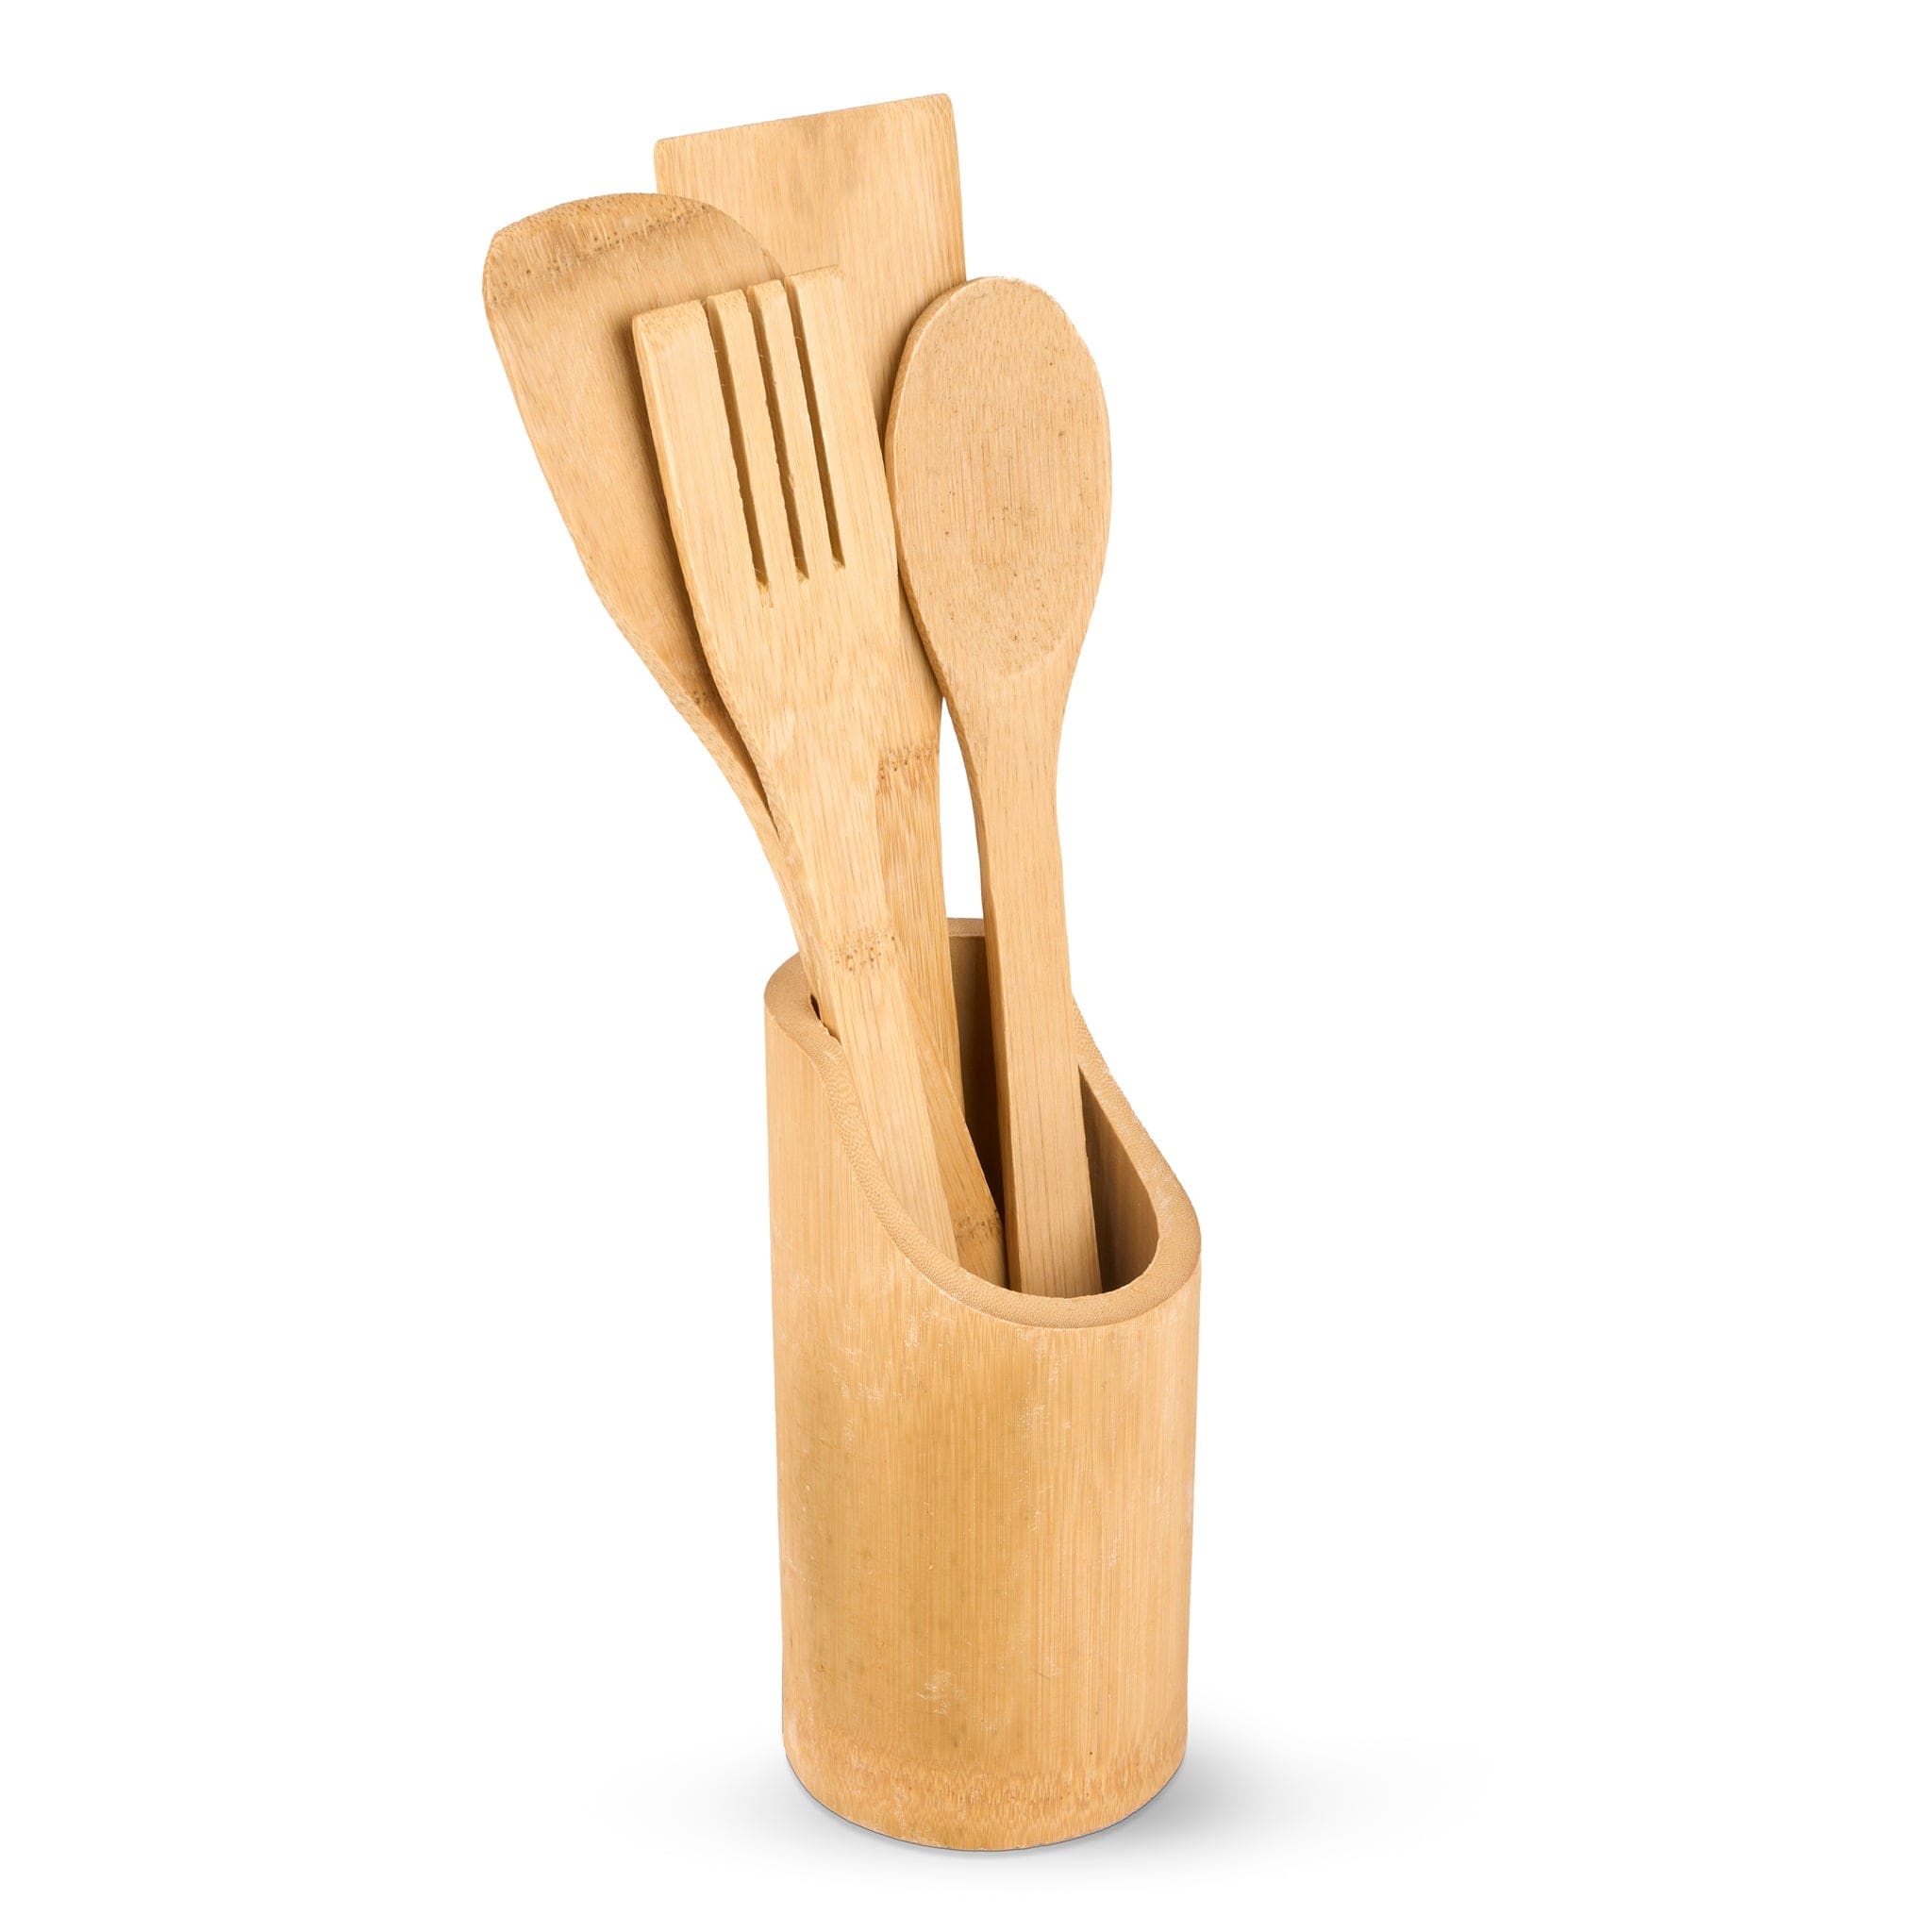 4Pcs Bamboo Essentials Kitchen Cooking Utensils With Utensils Holder 5056536103543 only5pounds-com